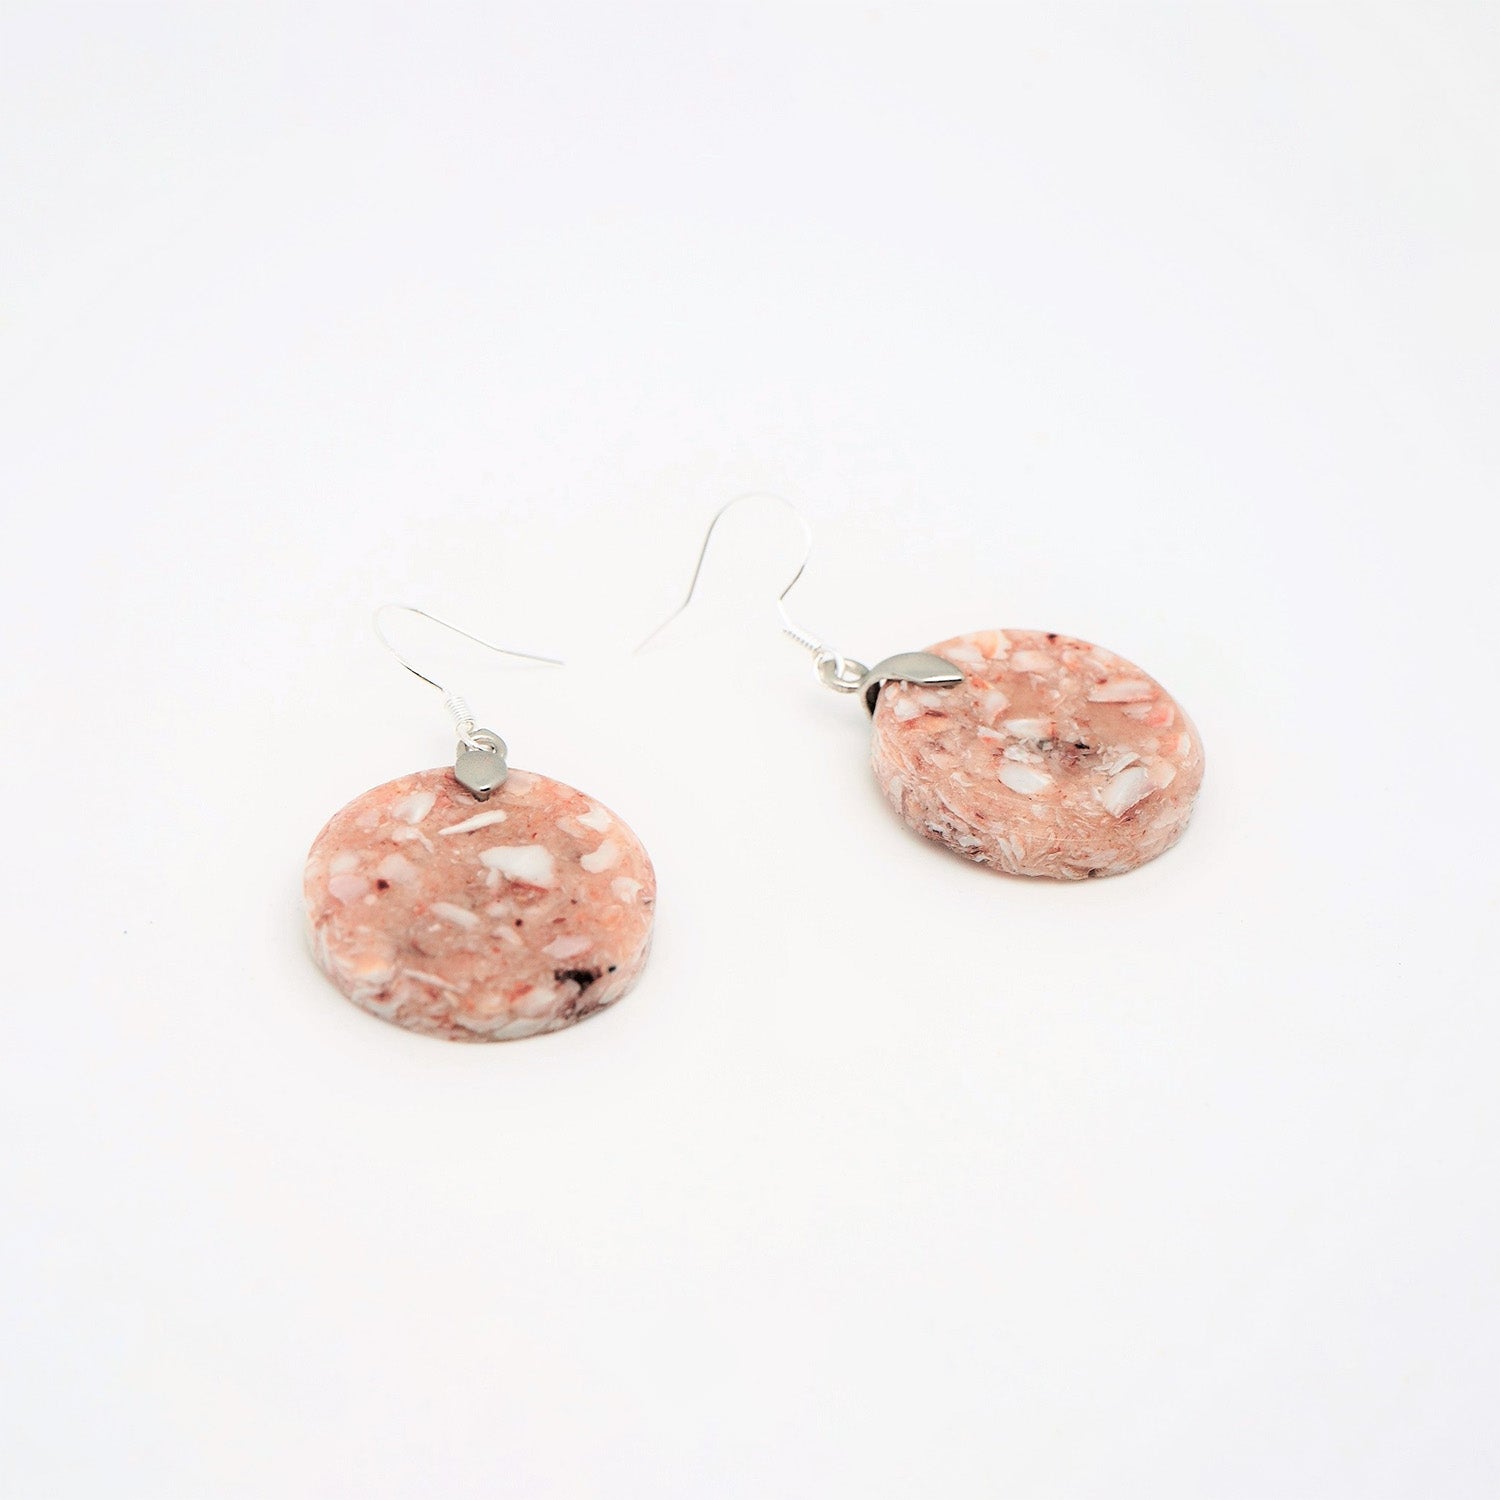 Round earrings made from recycled scallop shells